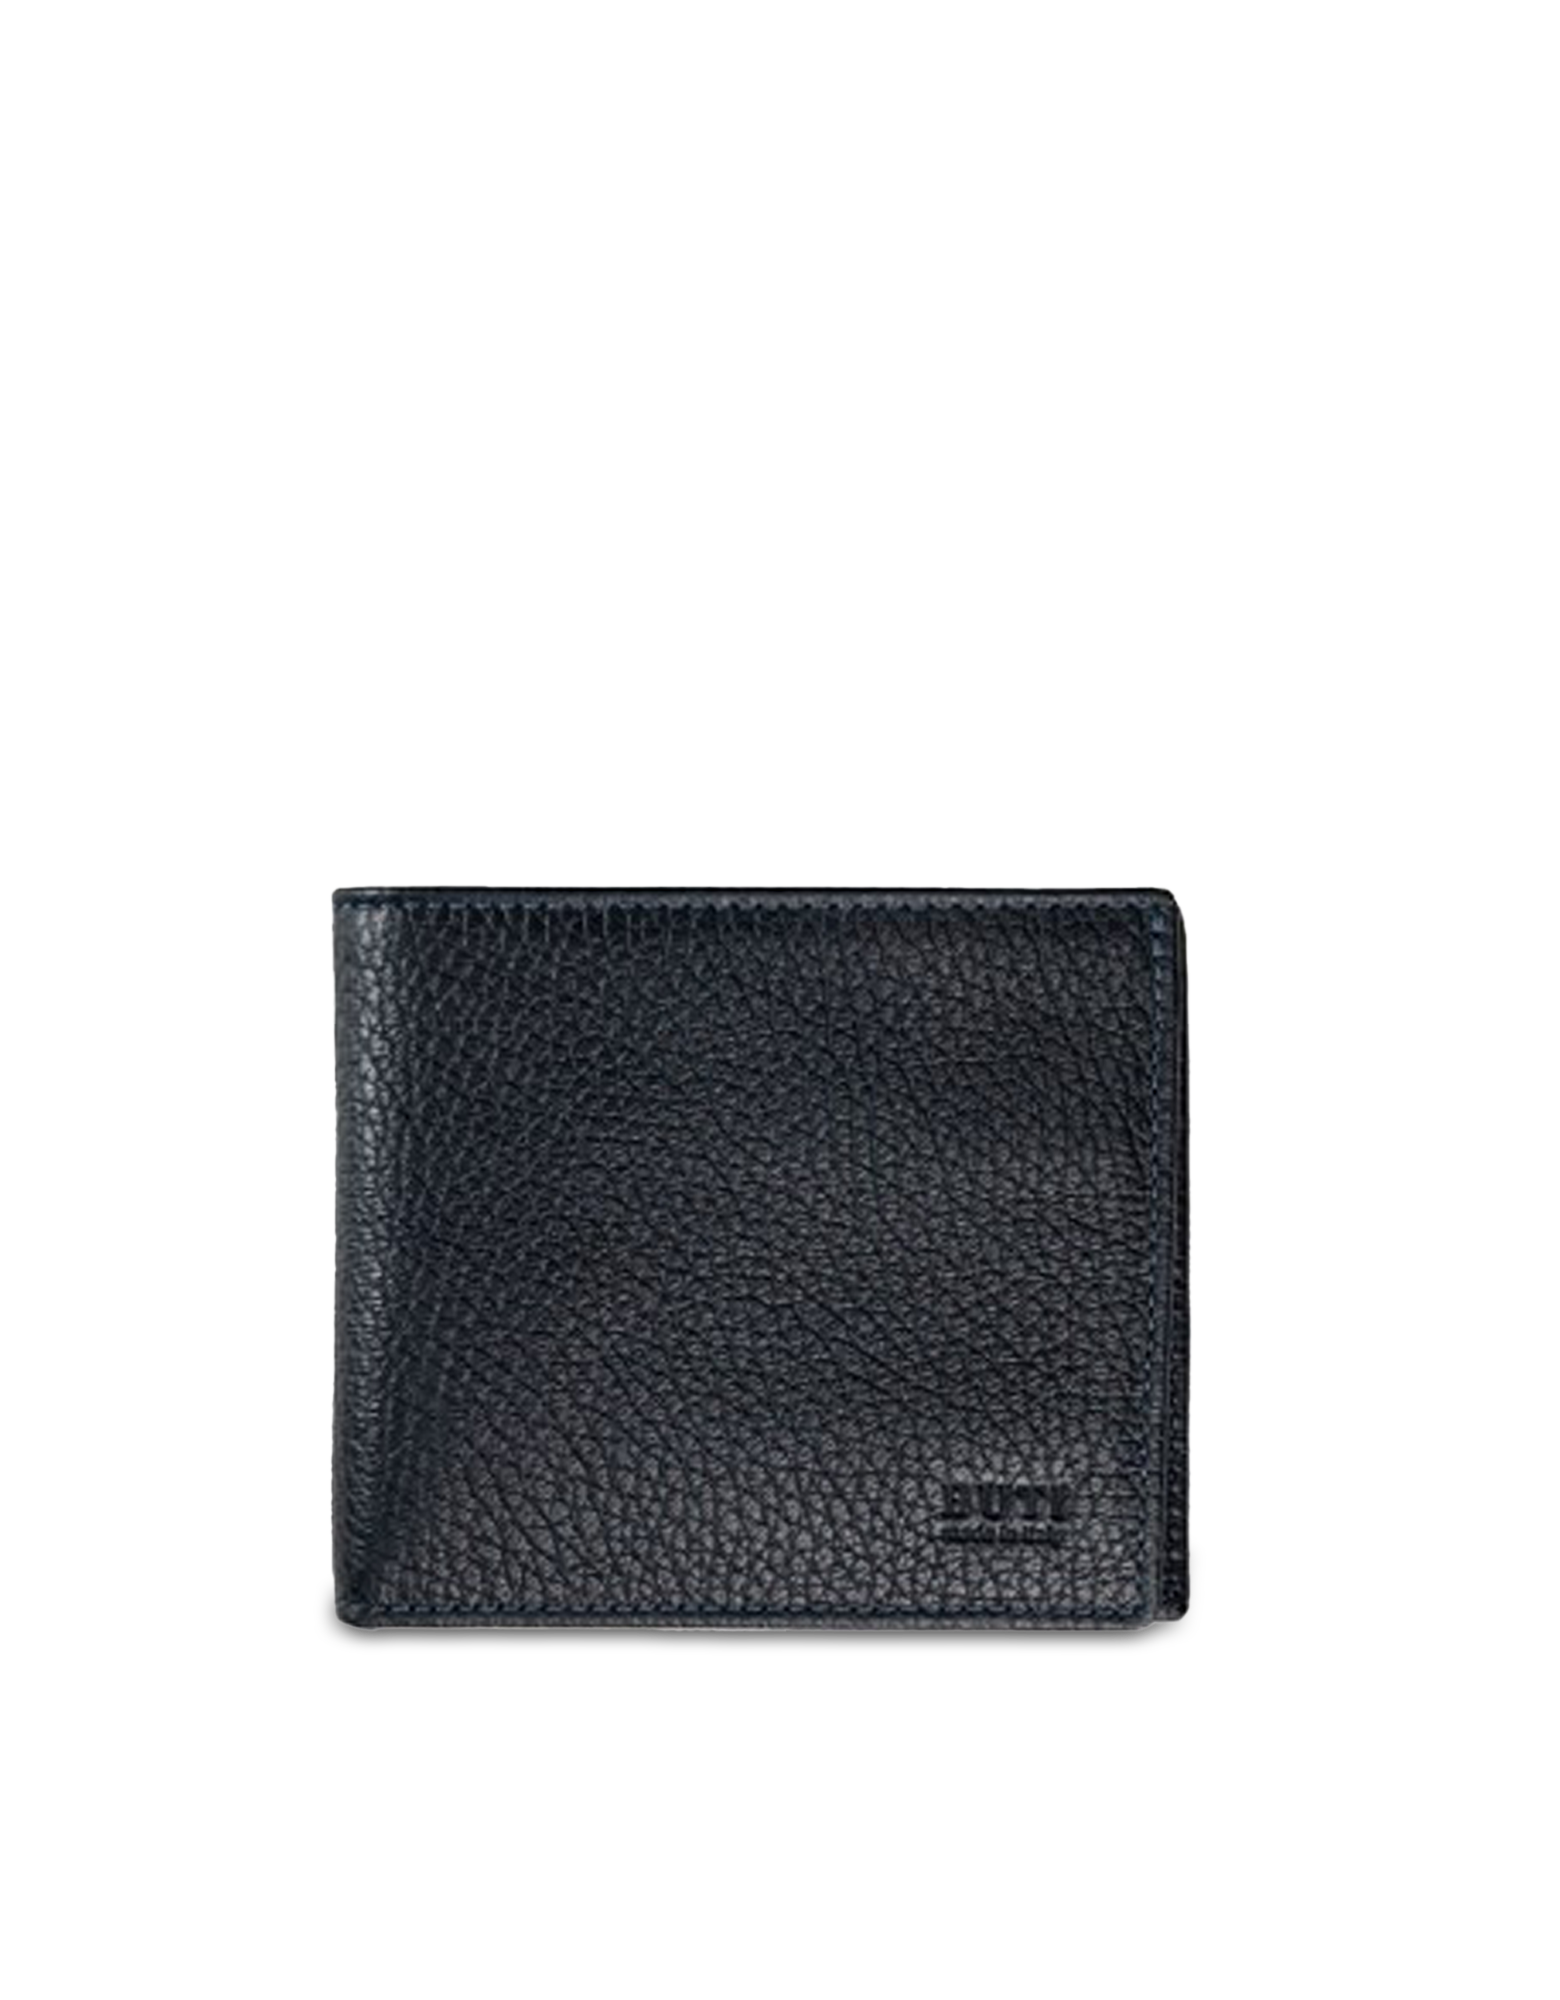 Buti Squared Embossed Leather Men's Wallet